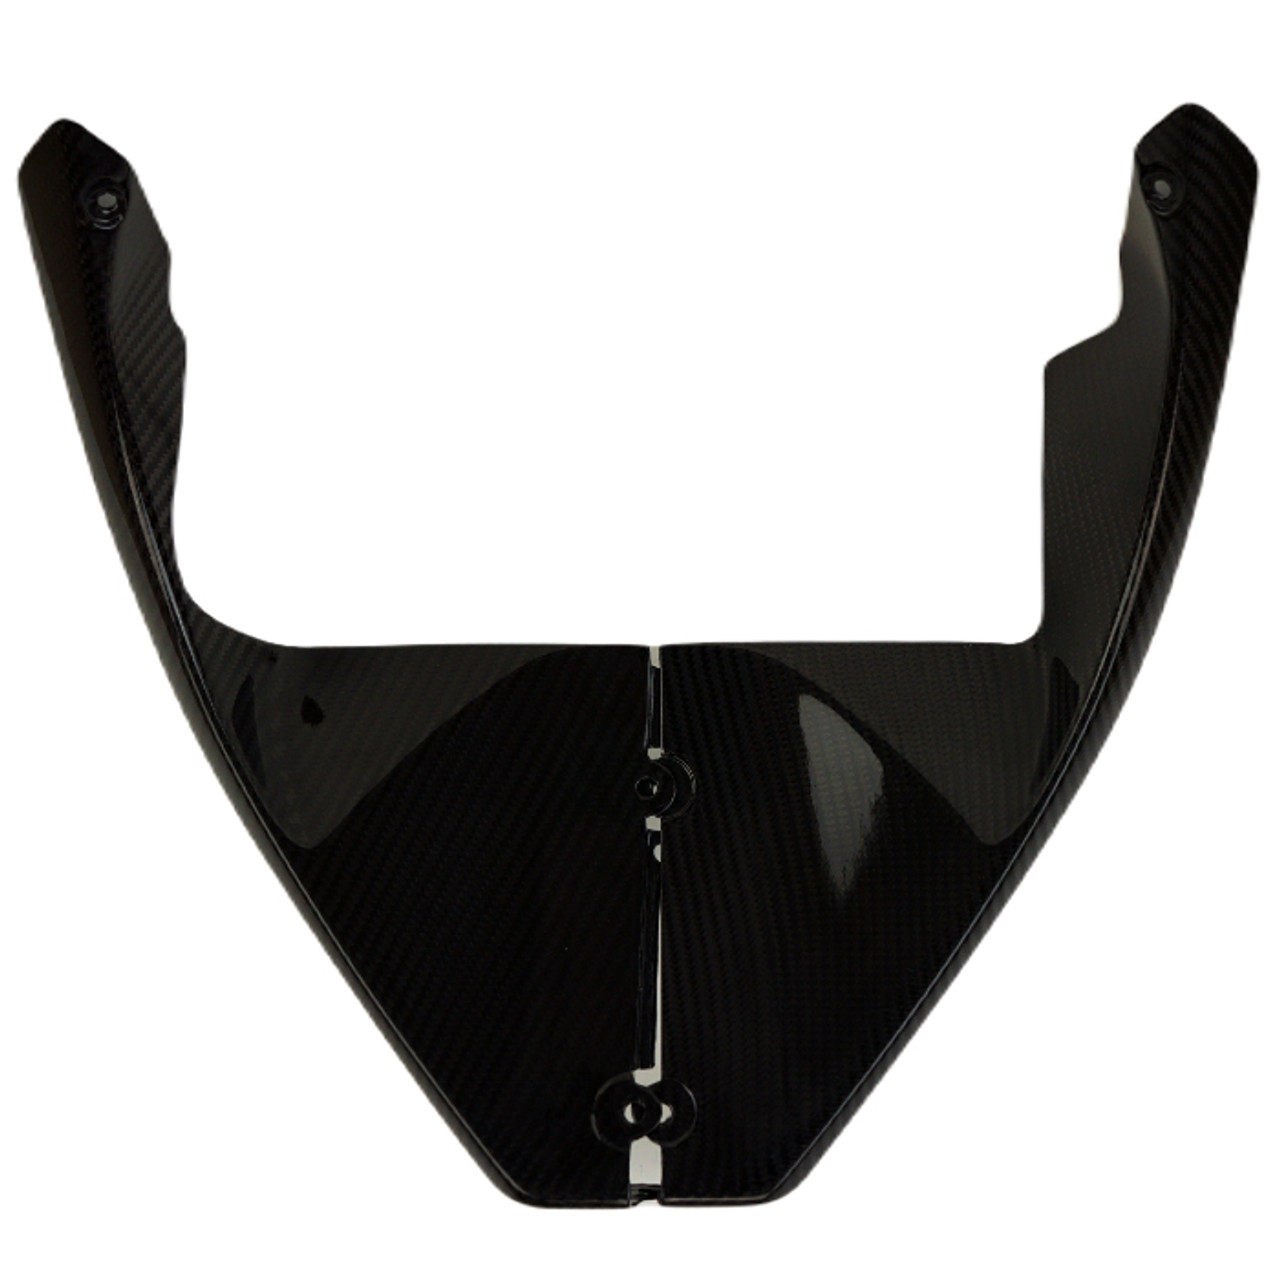 Leading Edges in Glossy Twill Weave Carbon Fiber for Kawasaki ZX10R 2021+